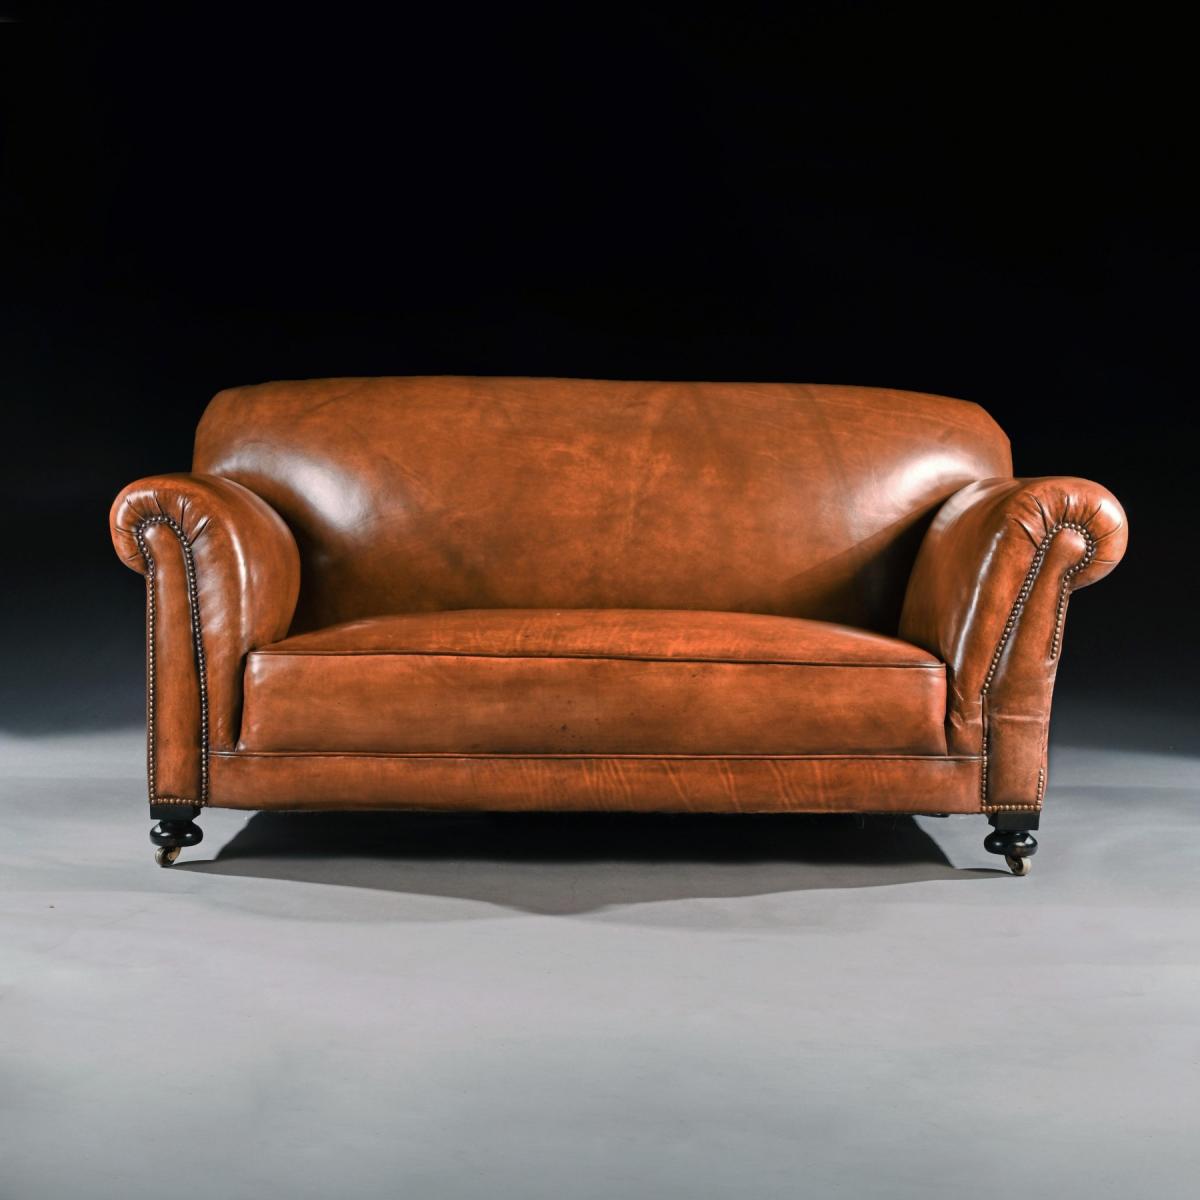 Late Victorian Leather Upholstered Drop-Arm Sofa